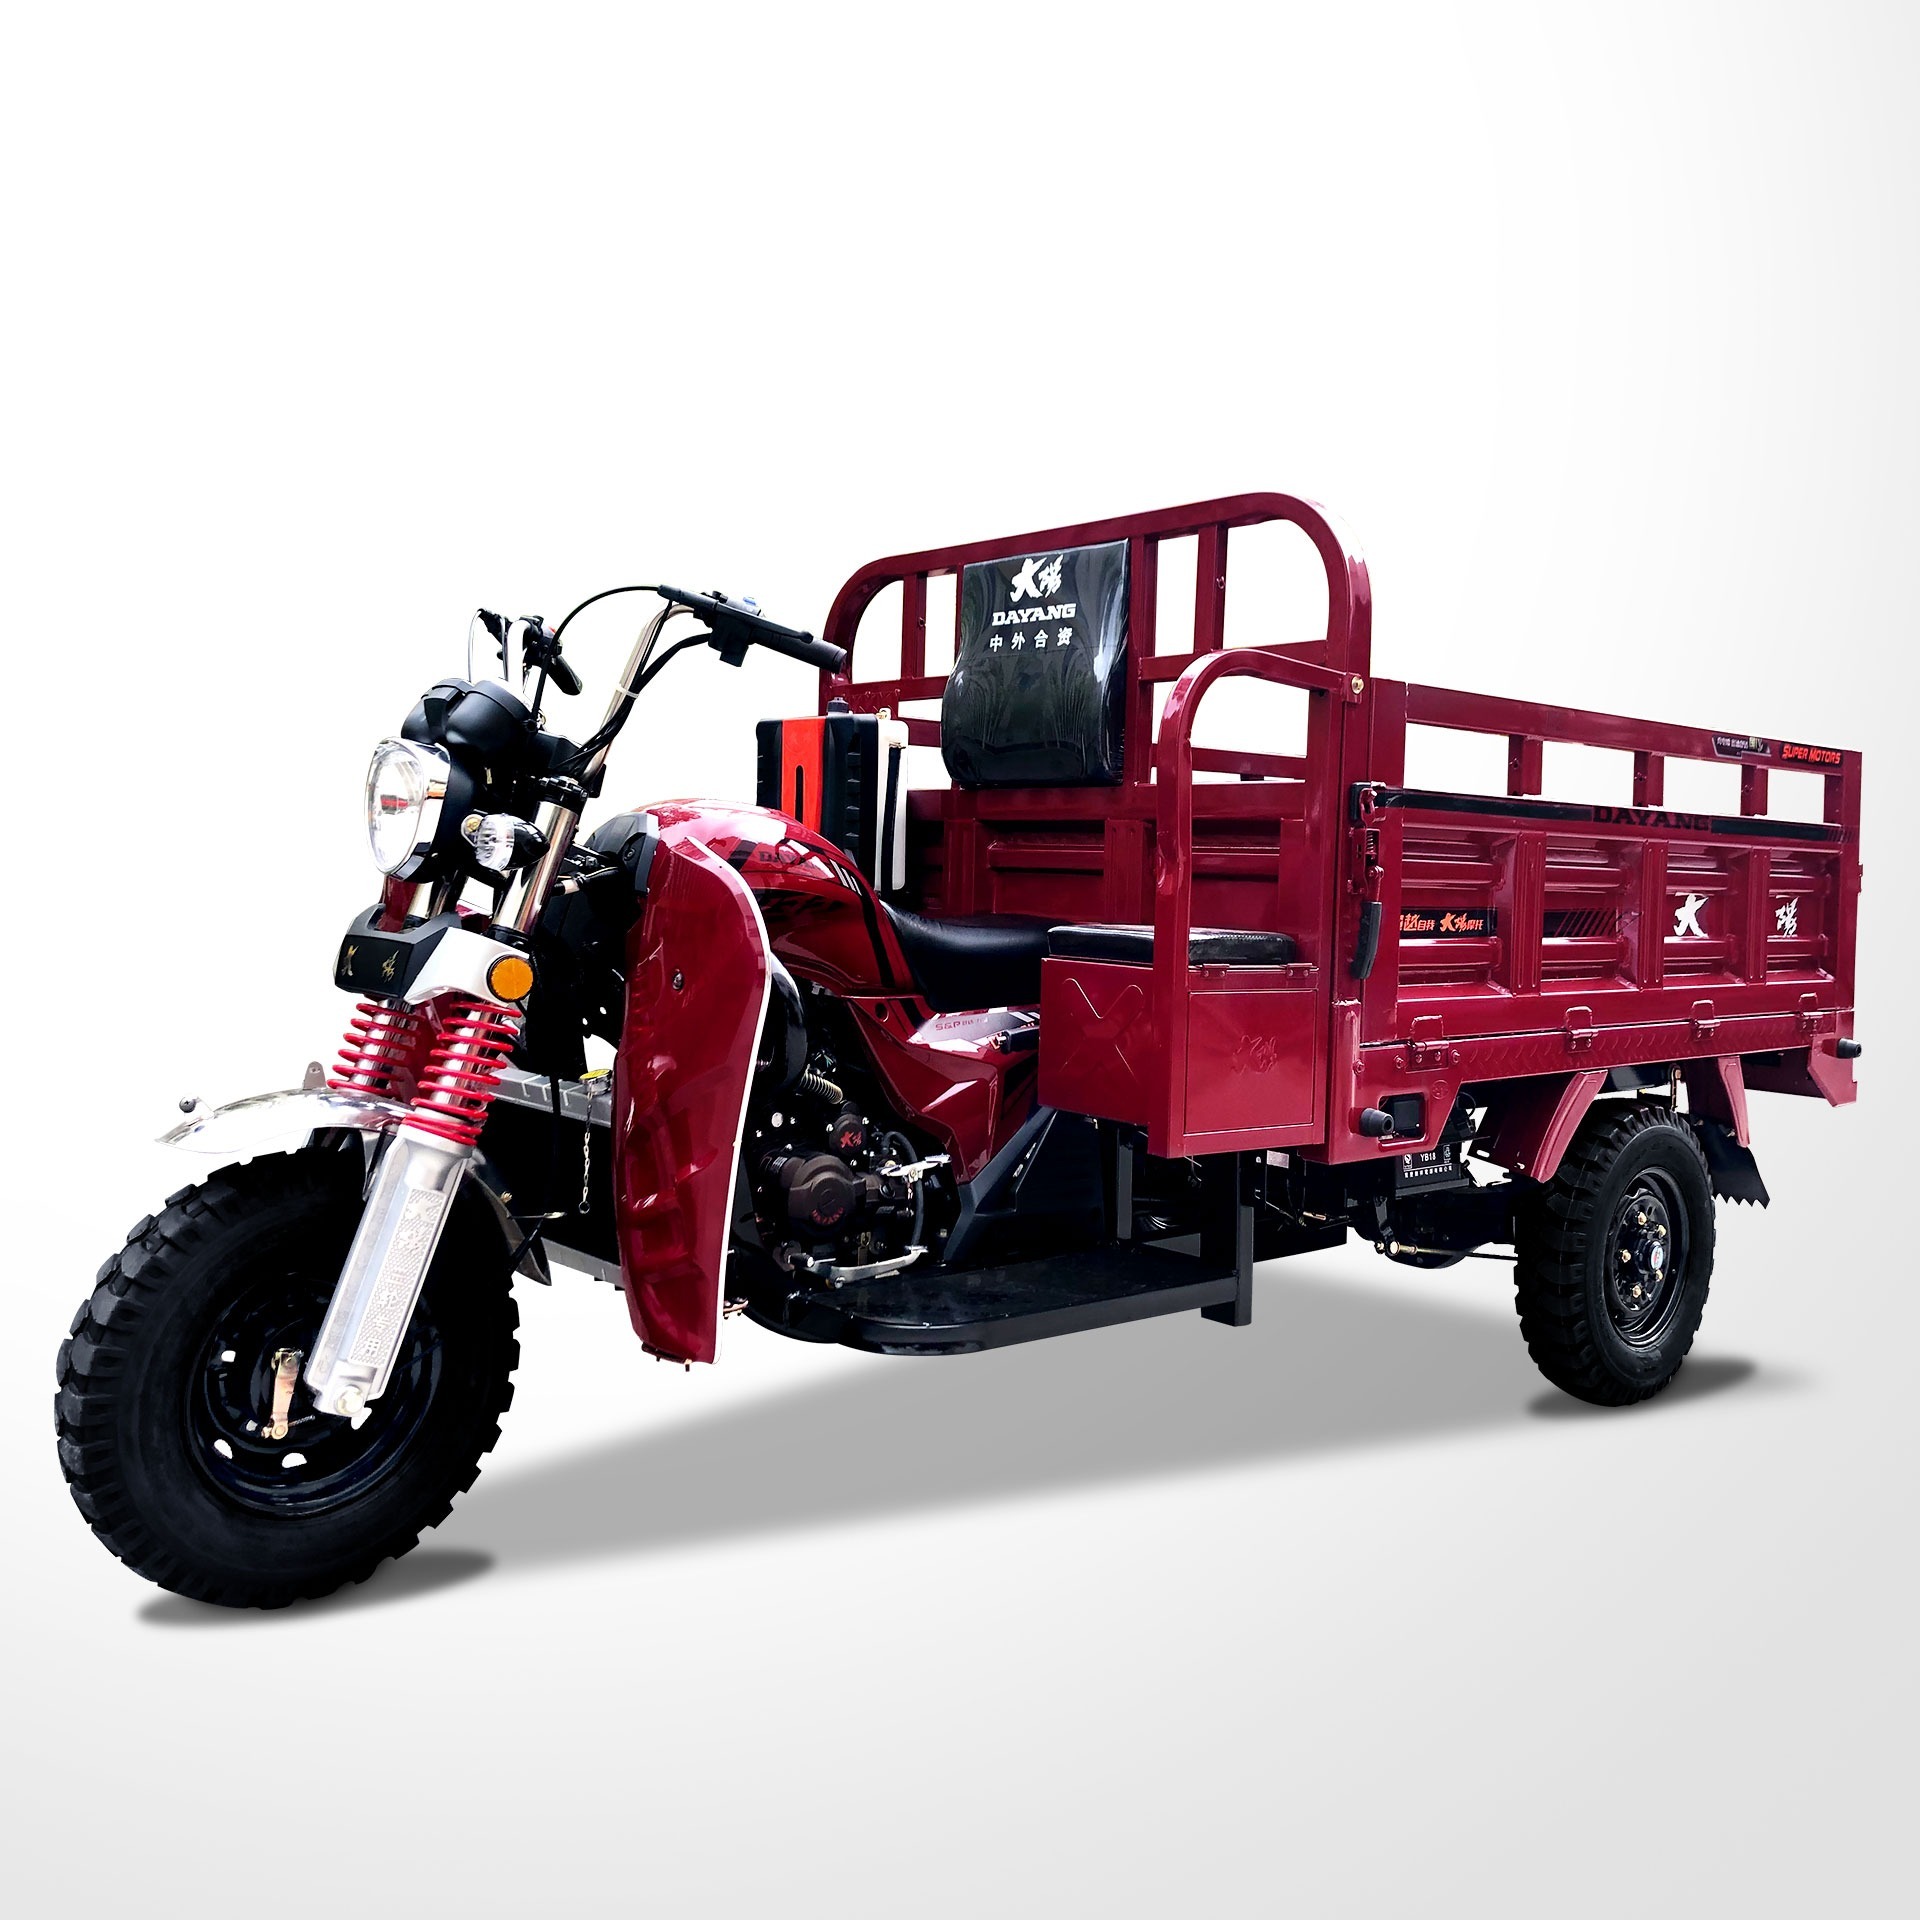 Motorcyce Electric Motorcycleelectric Rickshaw Mobility Scooterelectric Vehicle 250cc Motorcycle Electric Vehiclesdisabled Scootermotor Carauto Rickshaw